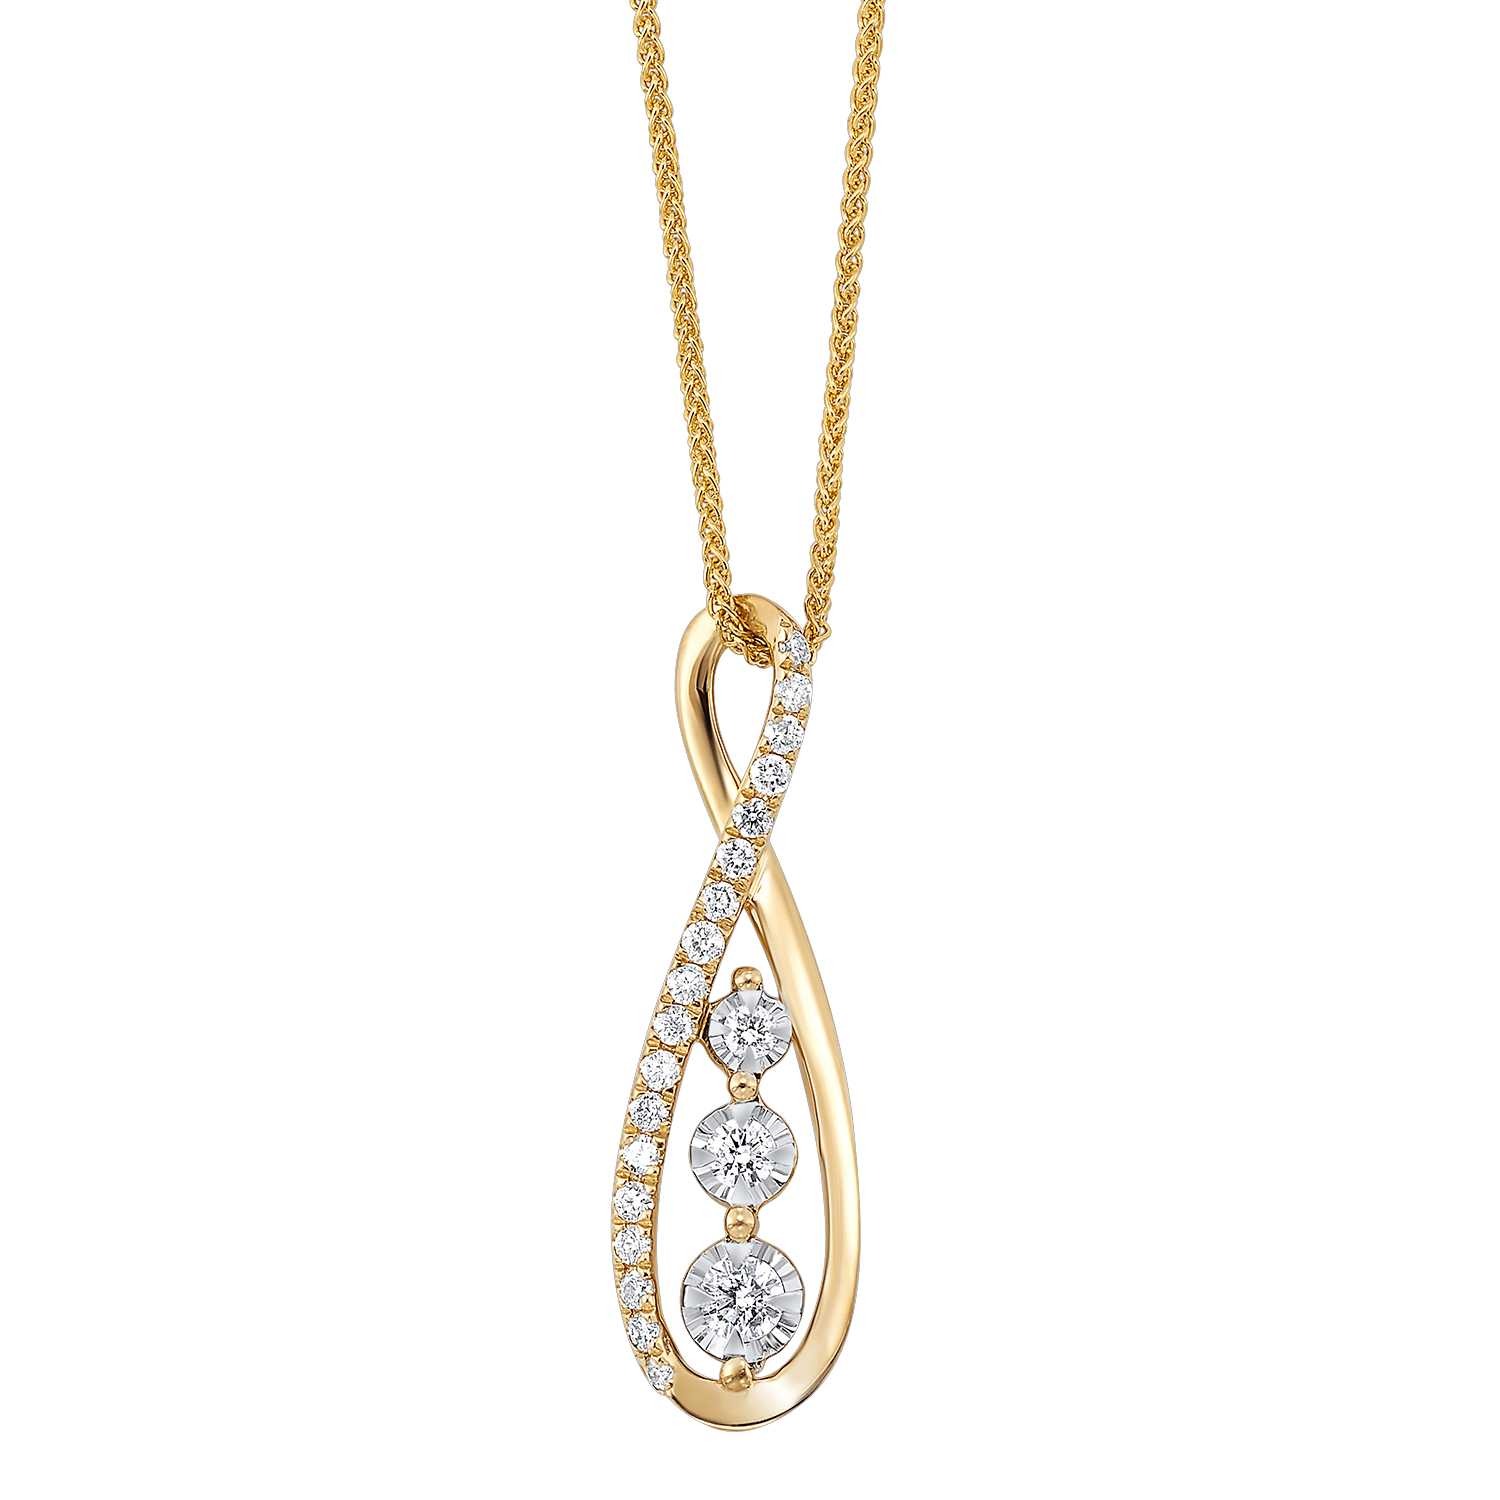 BW James Jewelers Necklace 16 Page Christmas Catalog Offer 14KT Diamond Necklace 1/4ctw